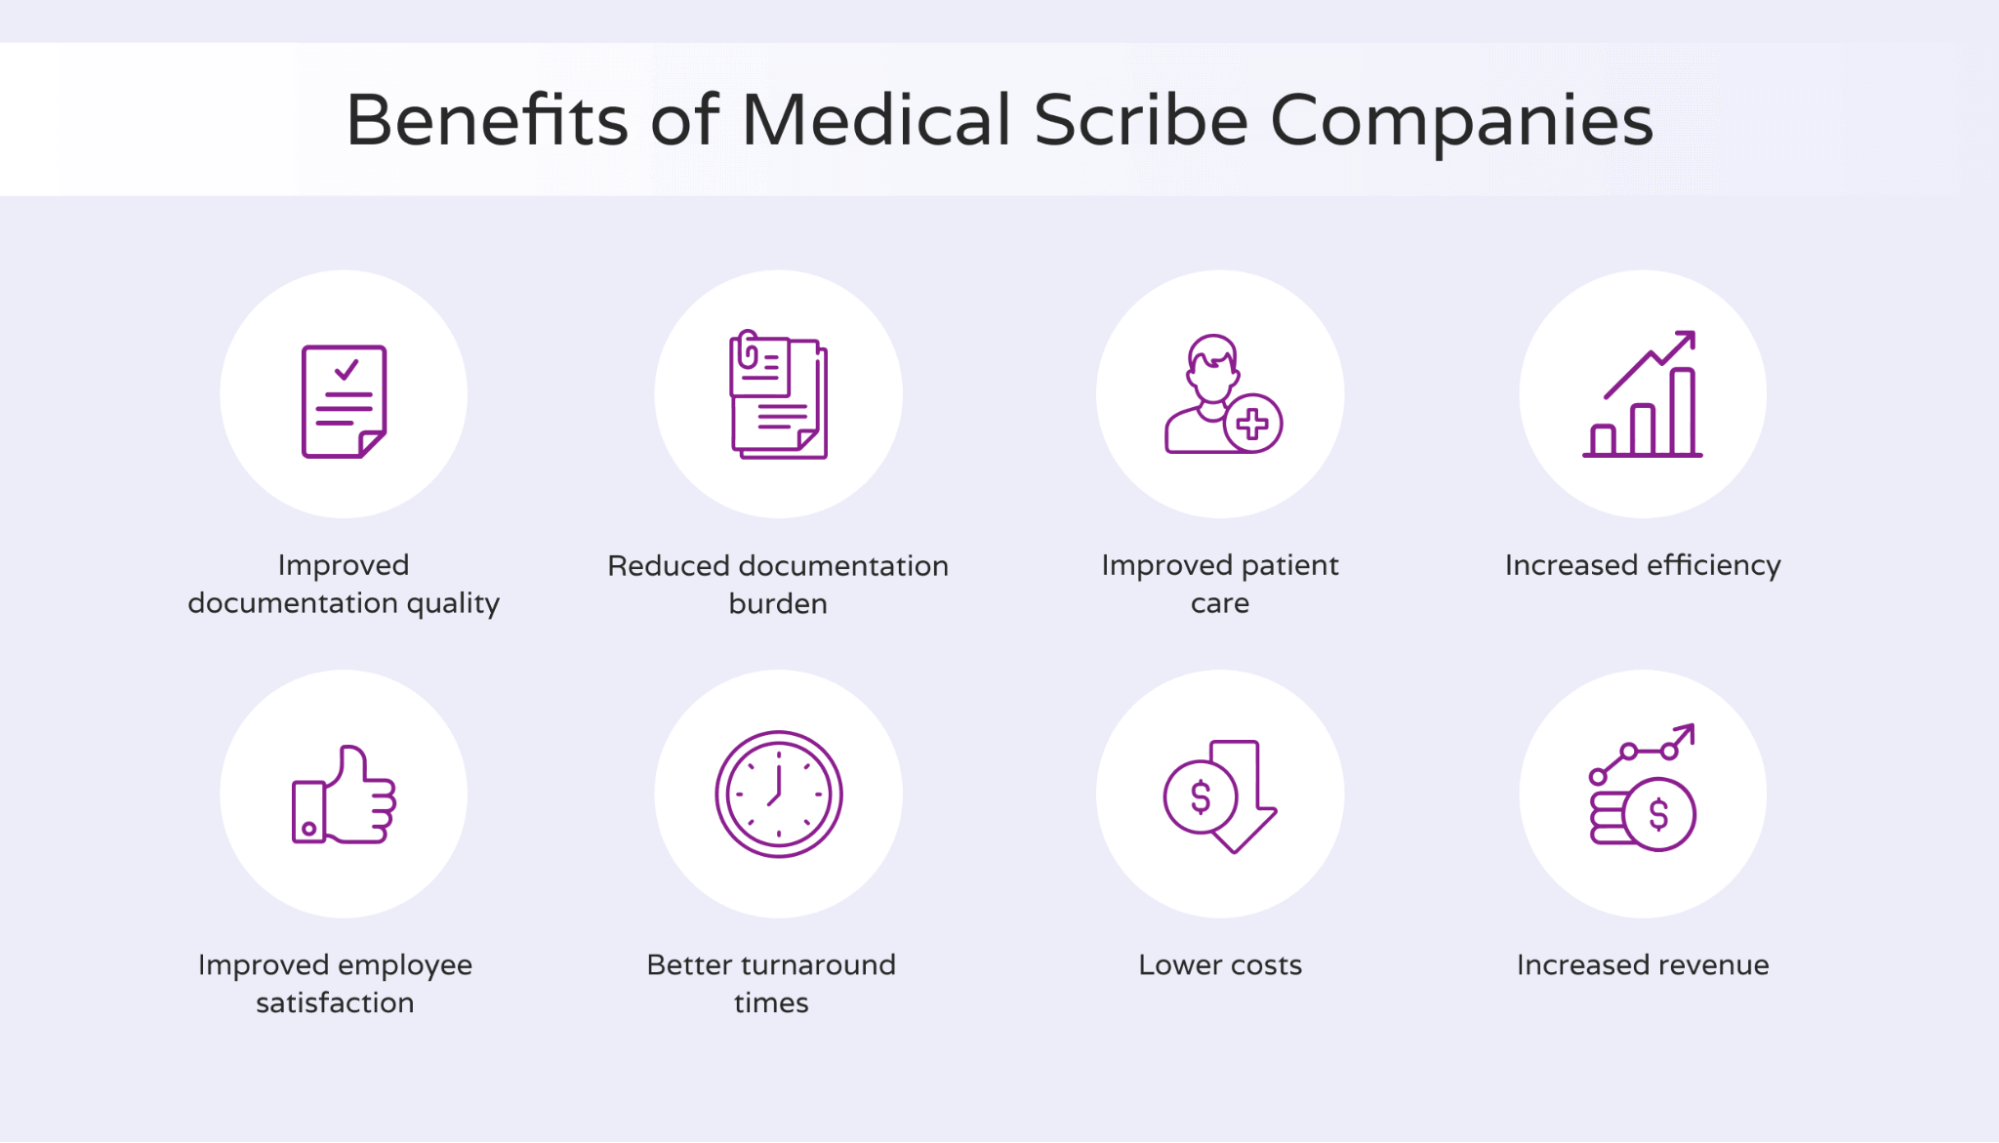 Image with a corresponding graphic showing benefits of medical scribe companies.